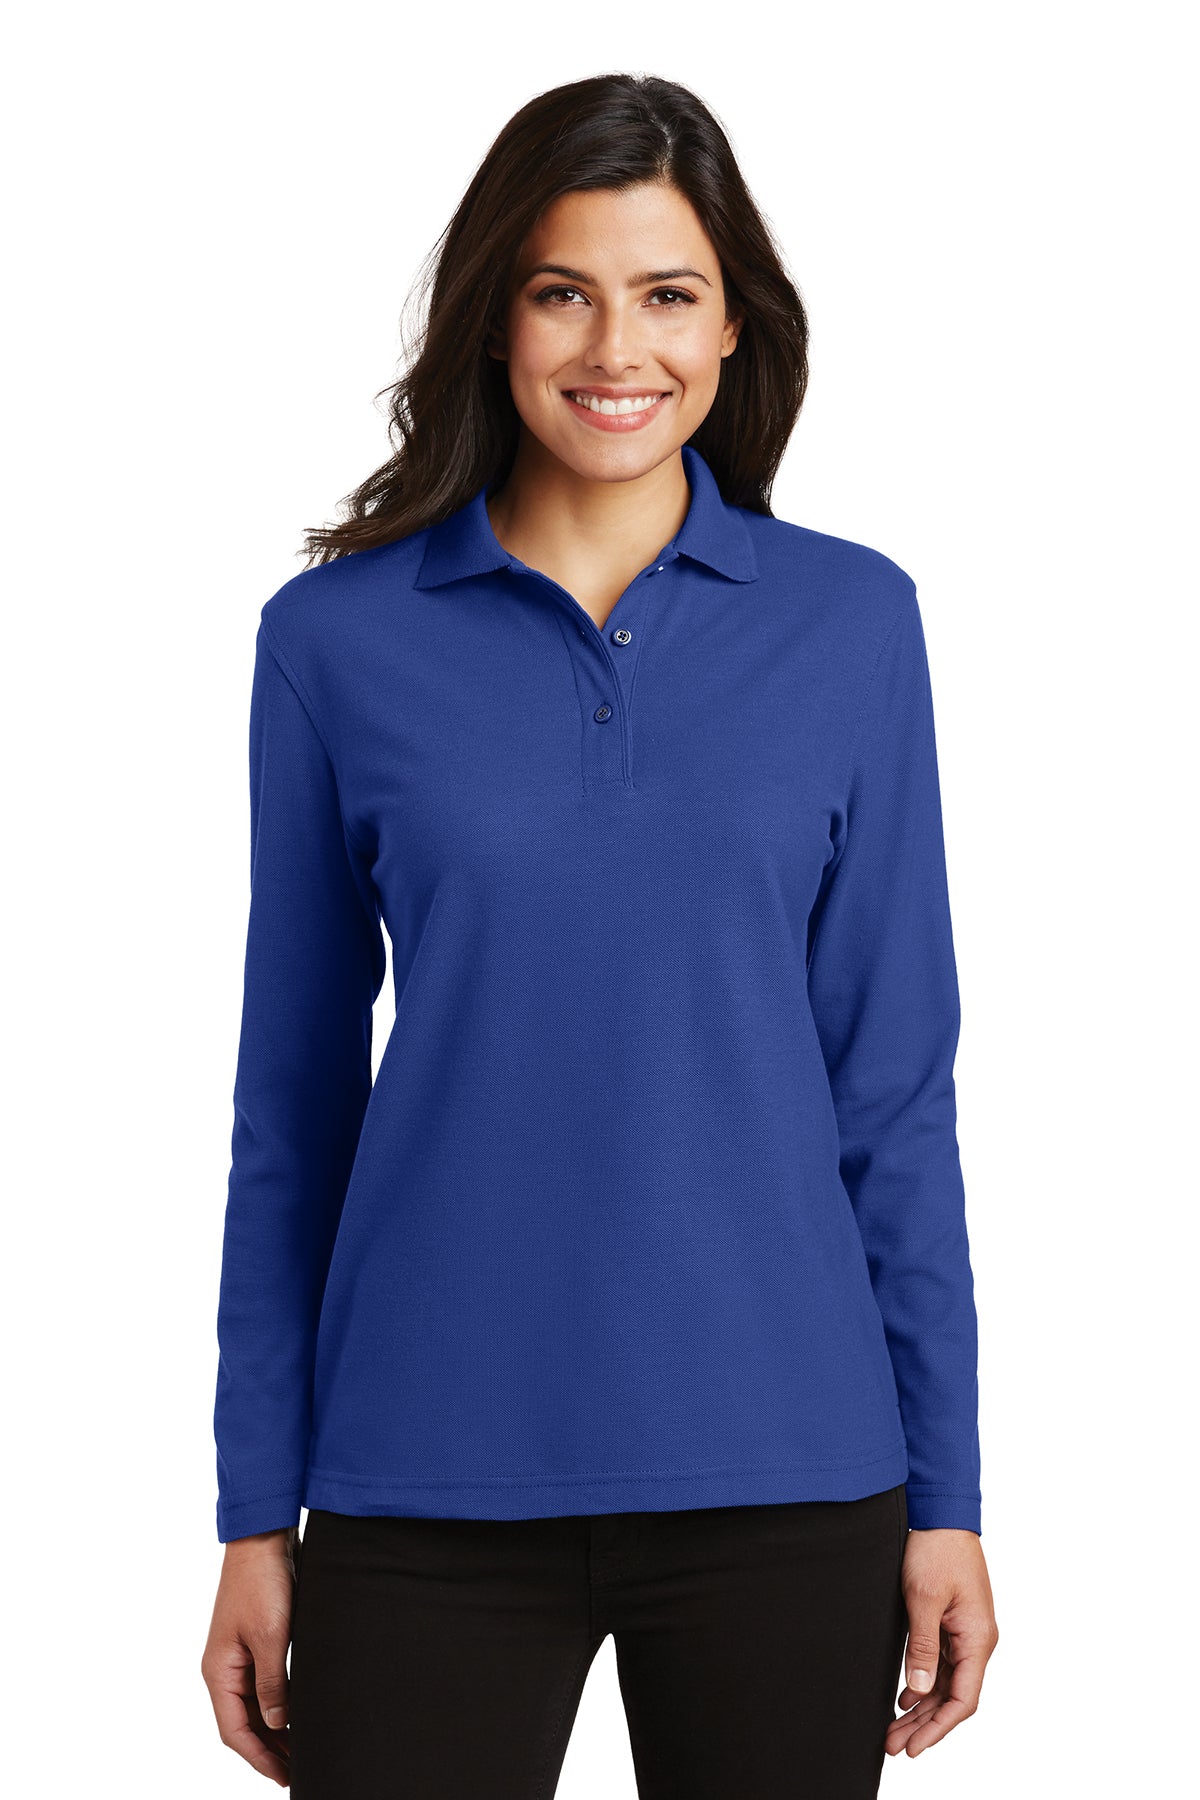 WINDSOR - LADIES Long Sleeve Polo - ROYAL (L500LS) - Southern Grace Creations